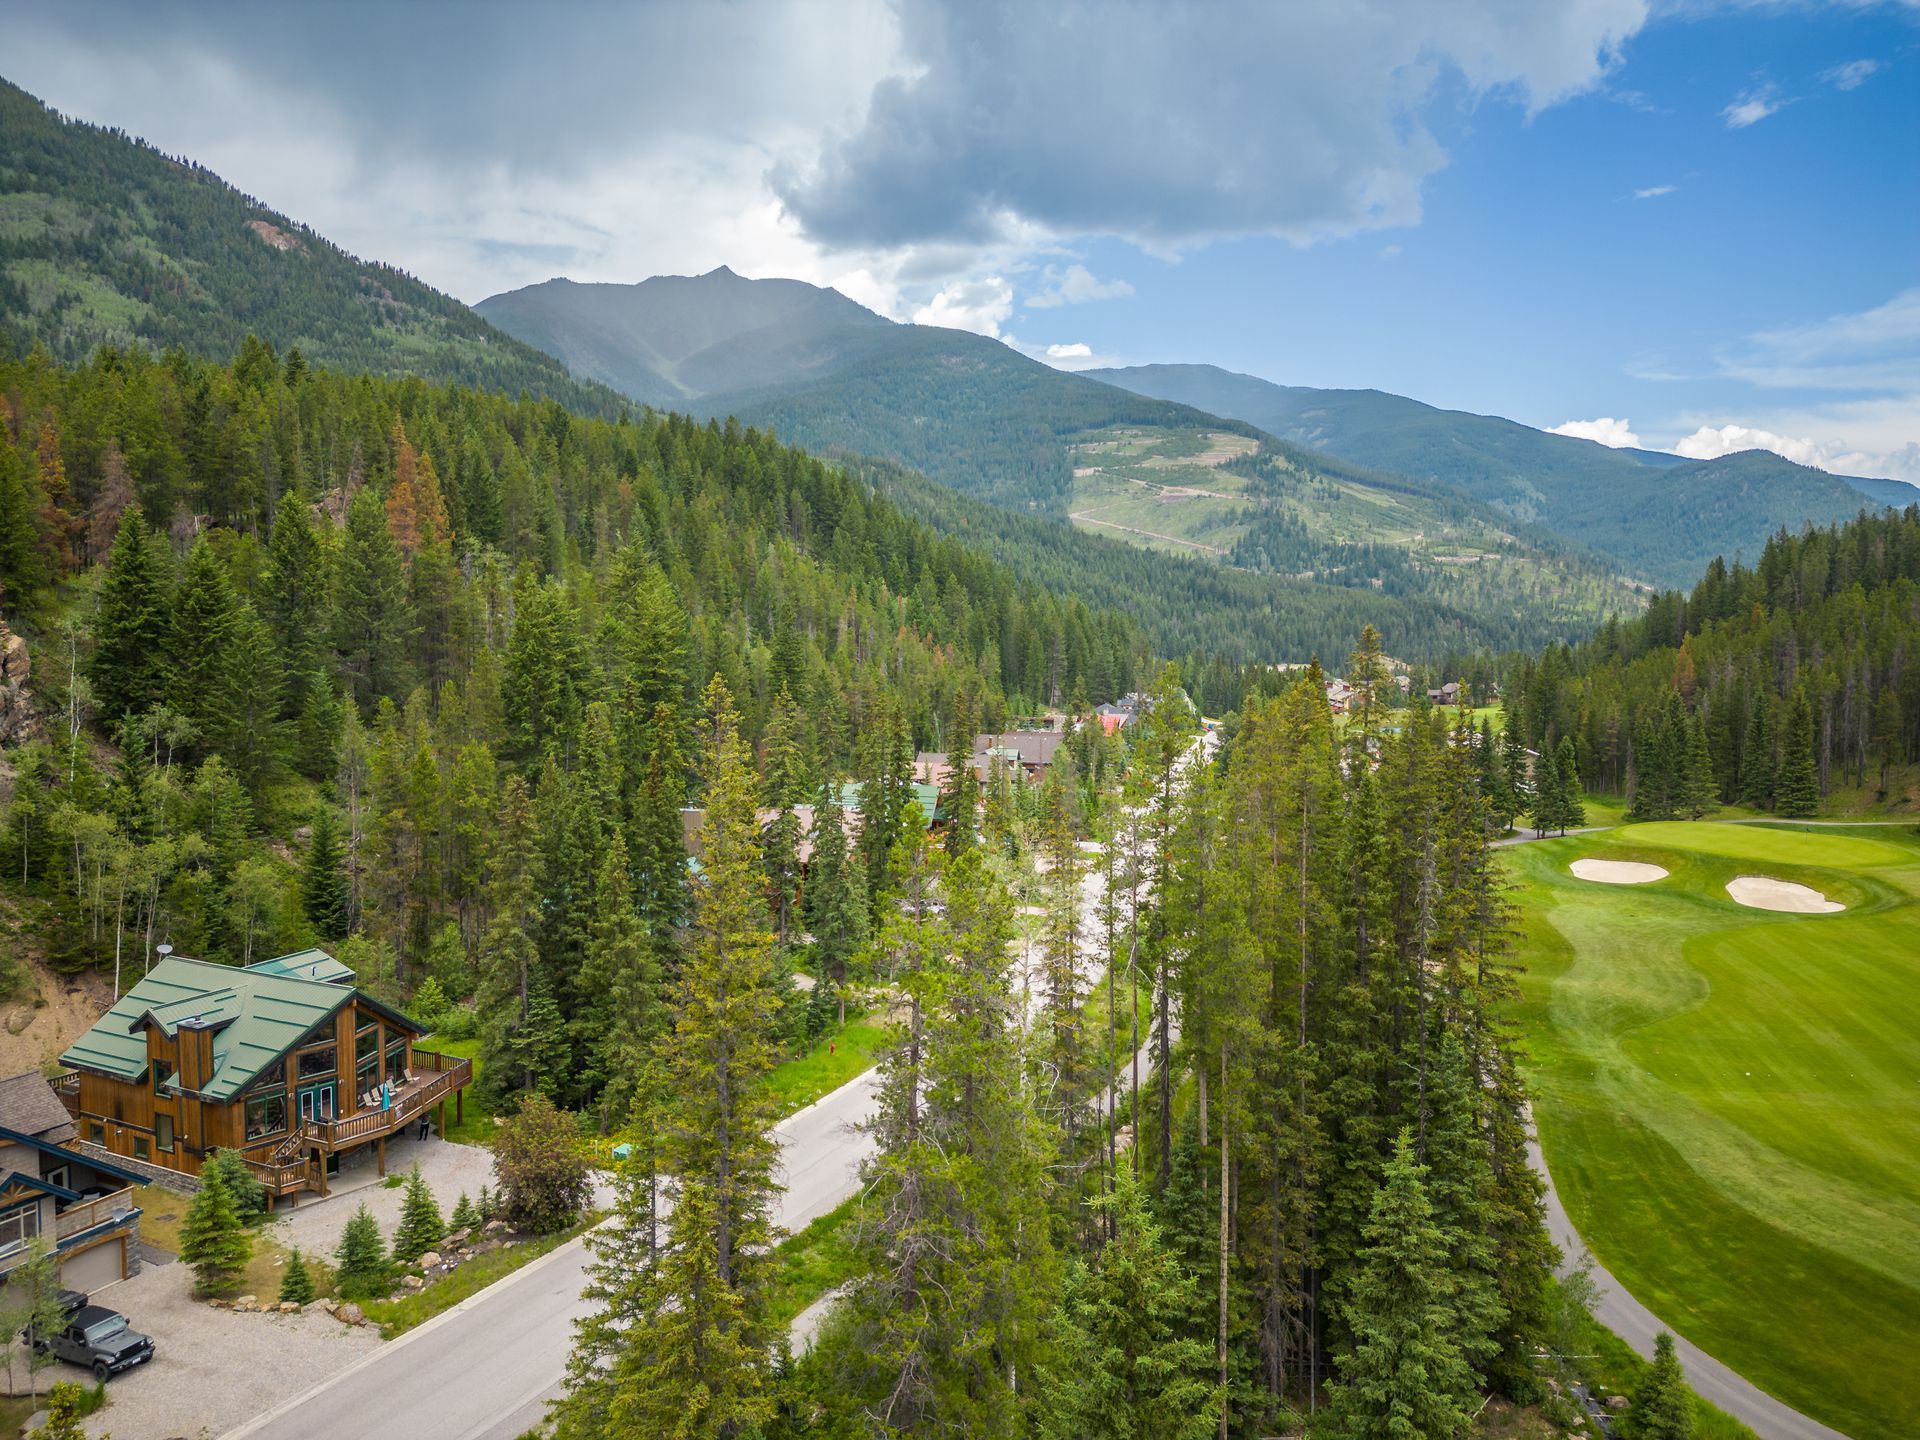 Walking distance to the Greywolf Golf Course from the Greywolf Lodge,  a golf course BC vacation rental hosted by Aisling Baile Property Management.